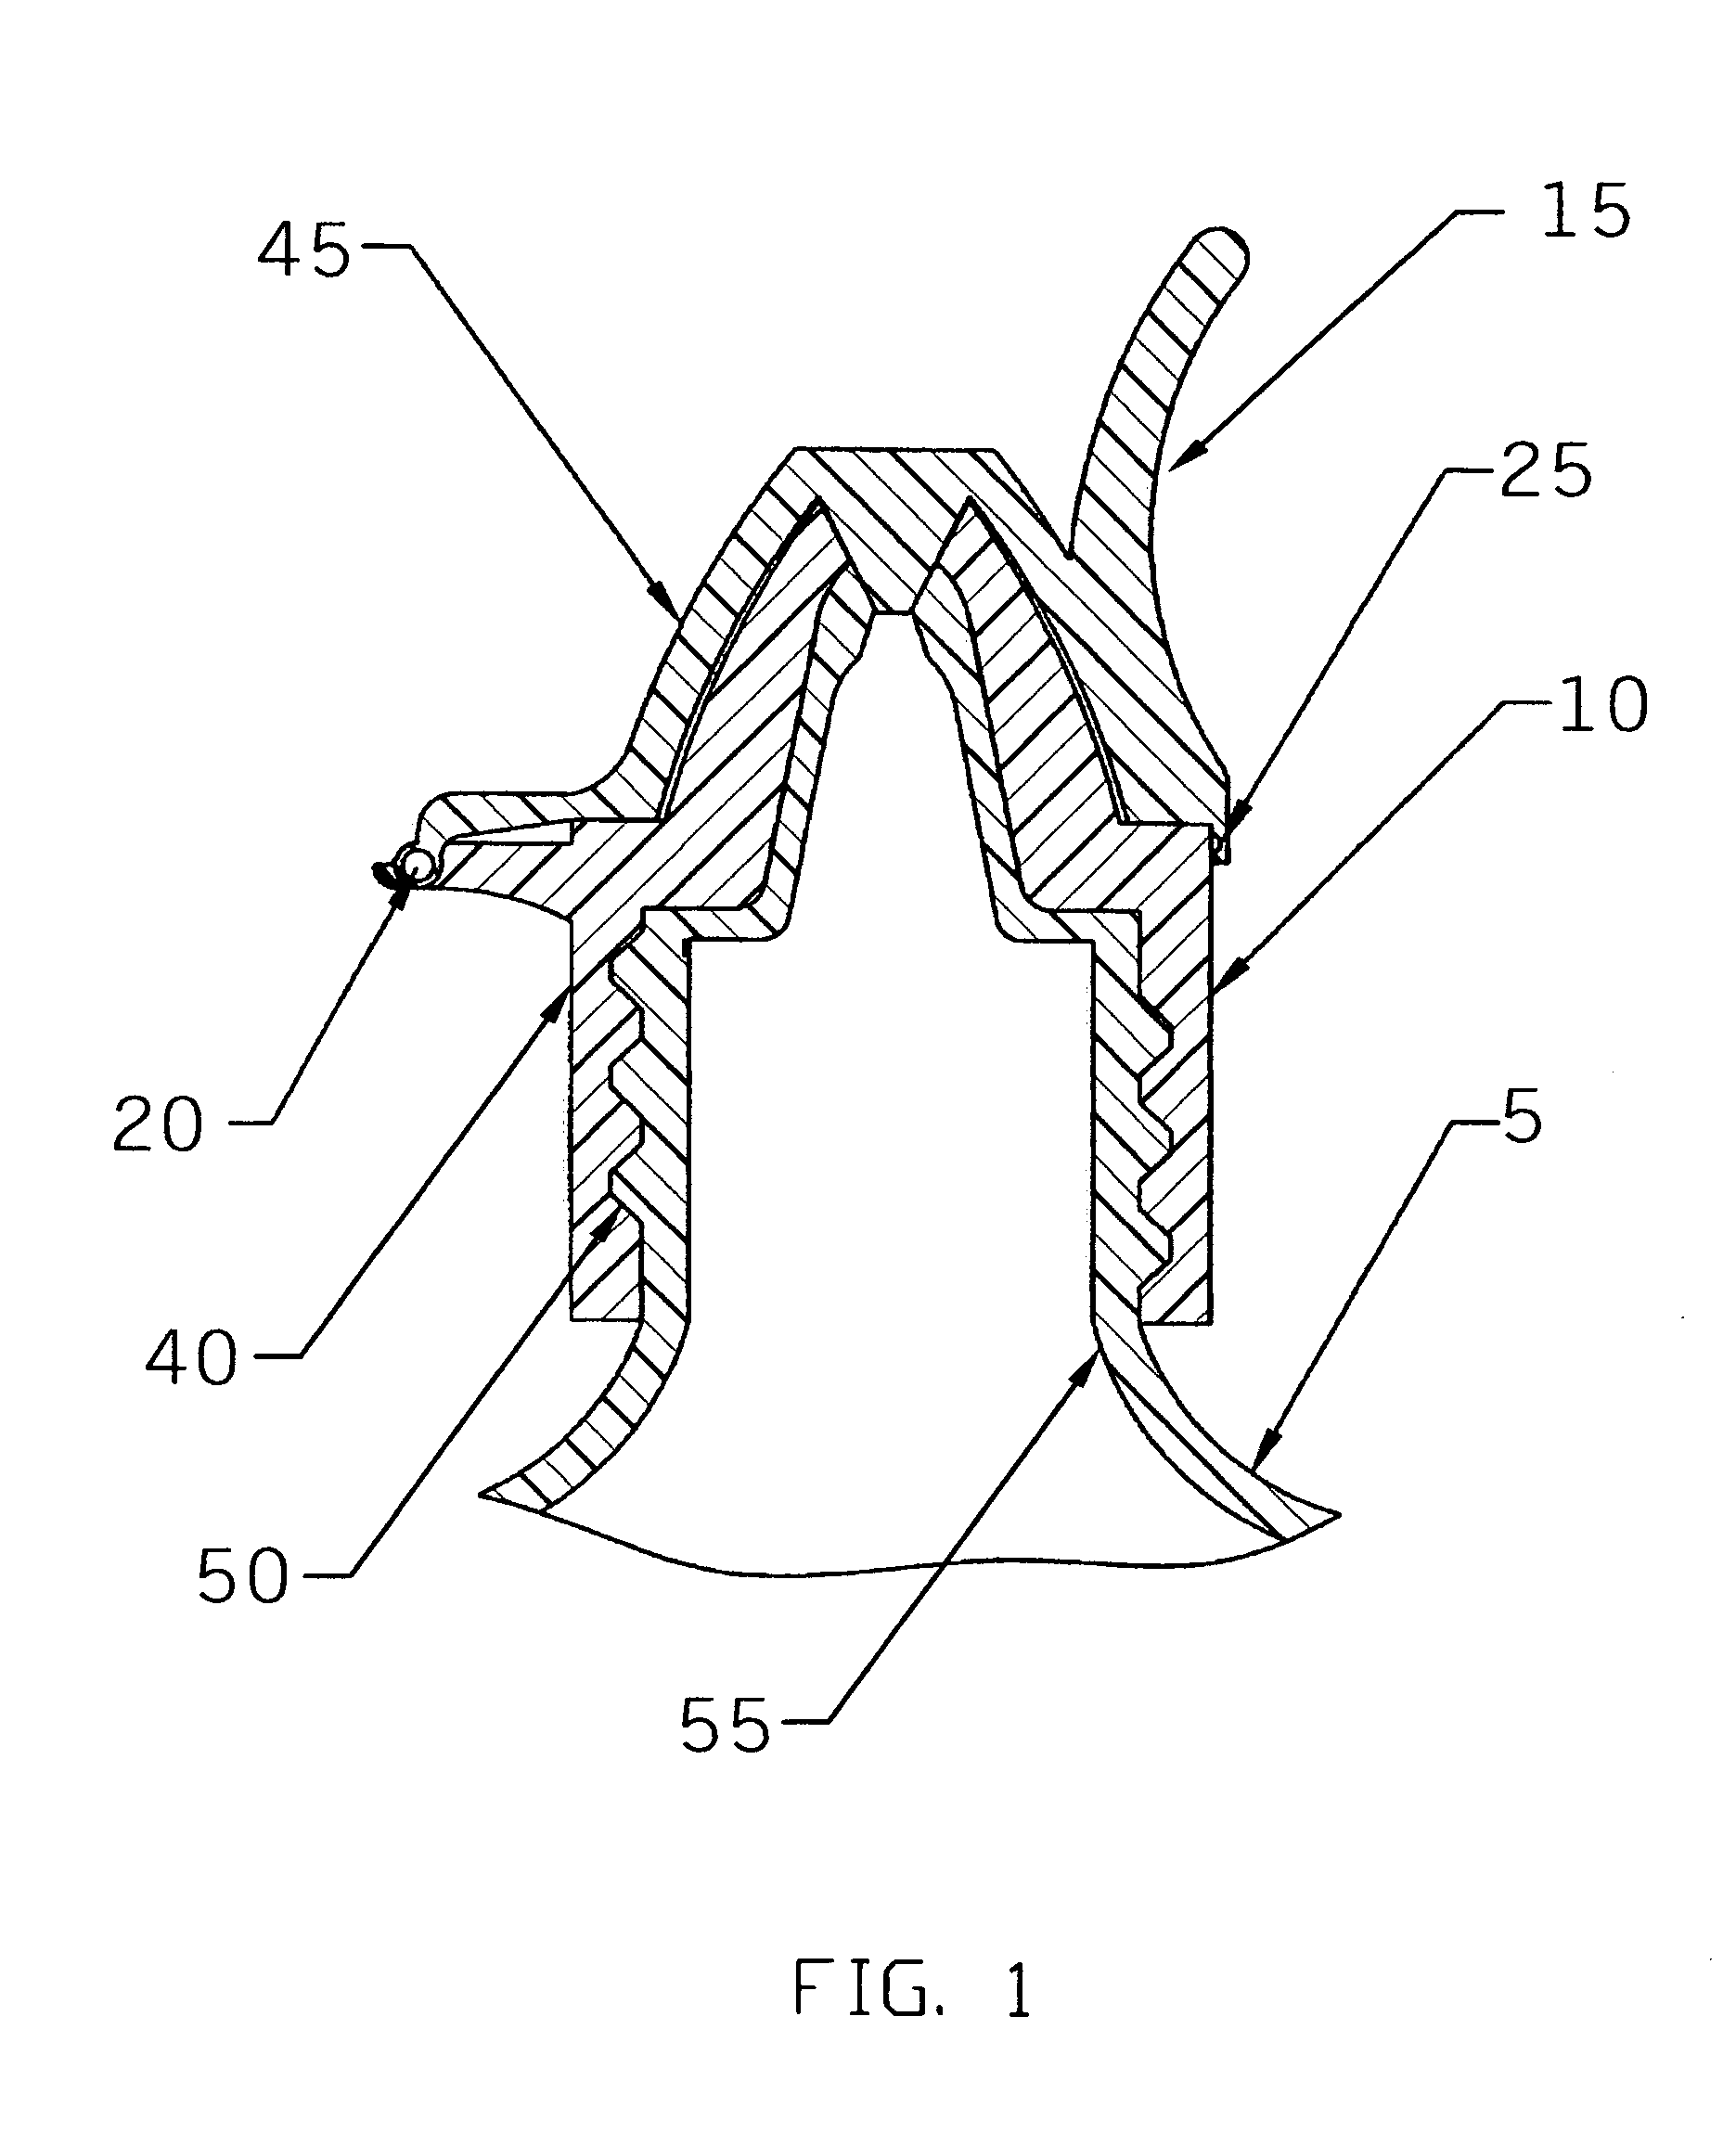 Ocular positioning droplet dispencing device with a recessed dispensing oriface